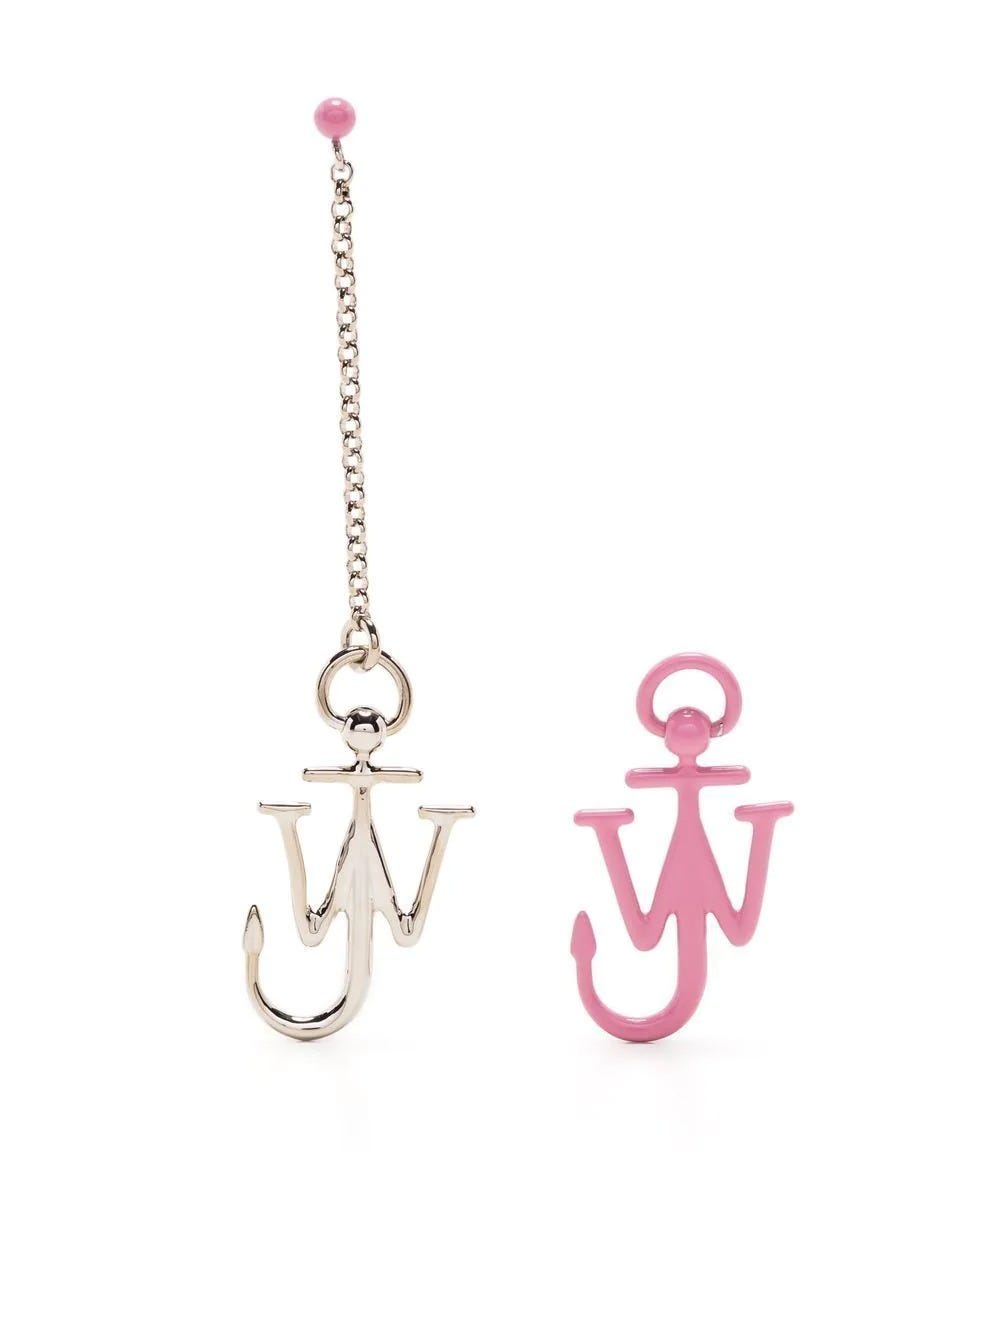 JW ANDERSON ASYMMETRICAL SILVER AND PINK ANCHOR EARRINGS